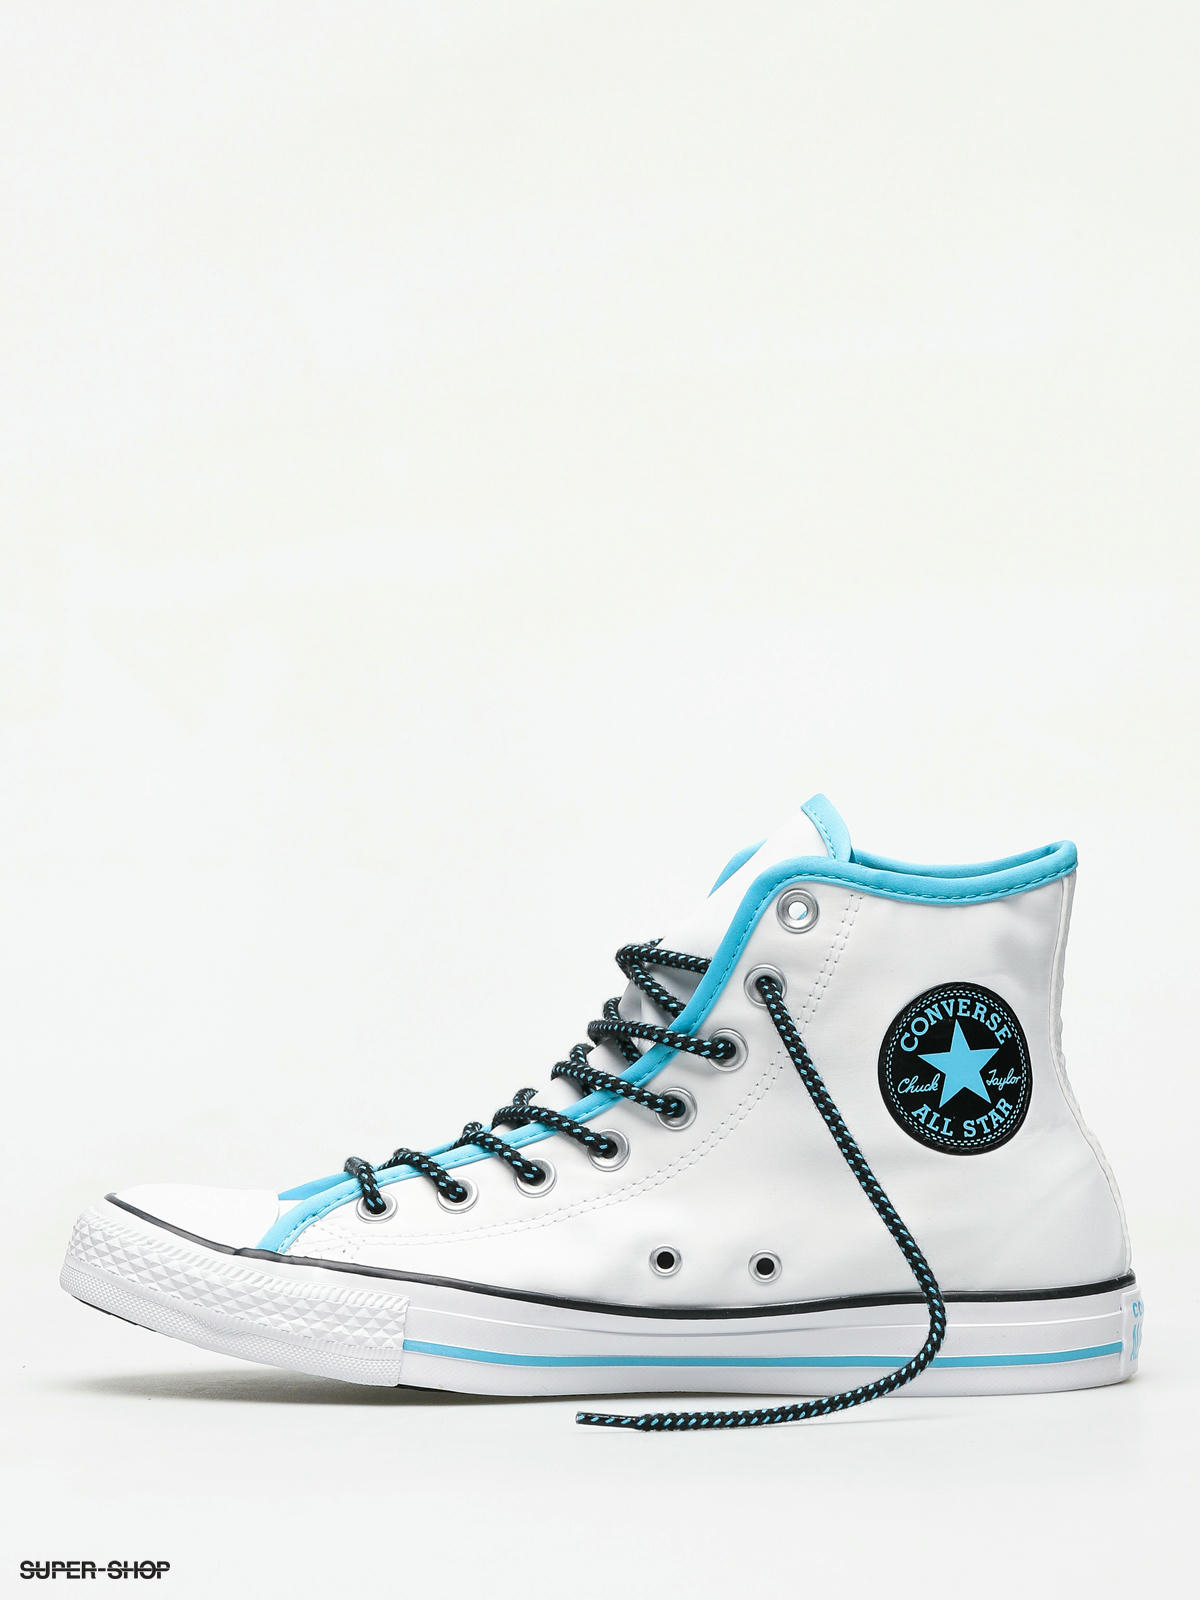 blue and white converse high tops